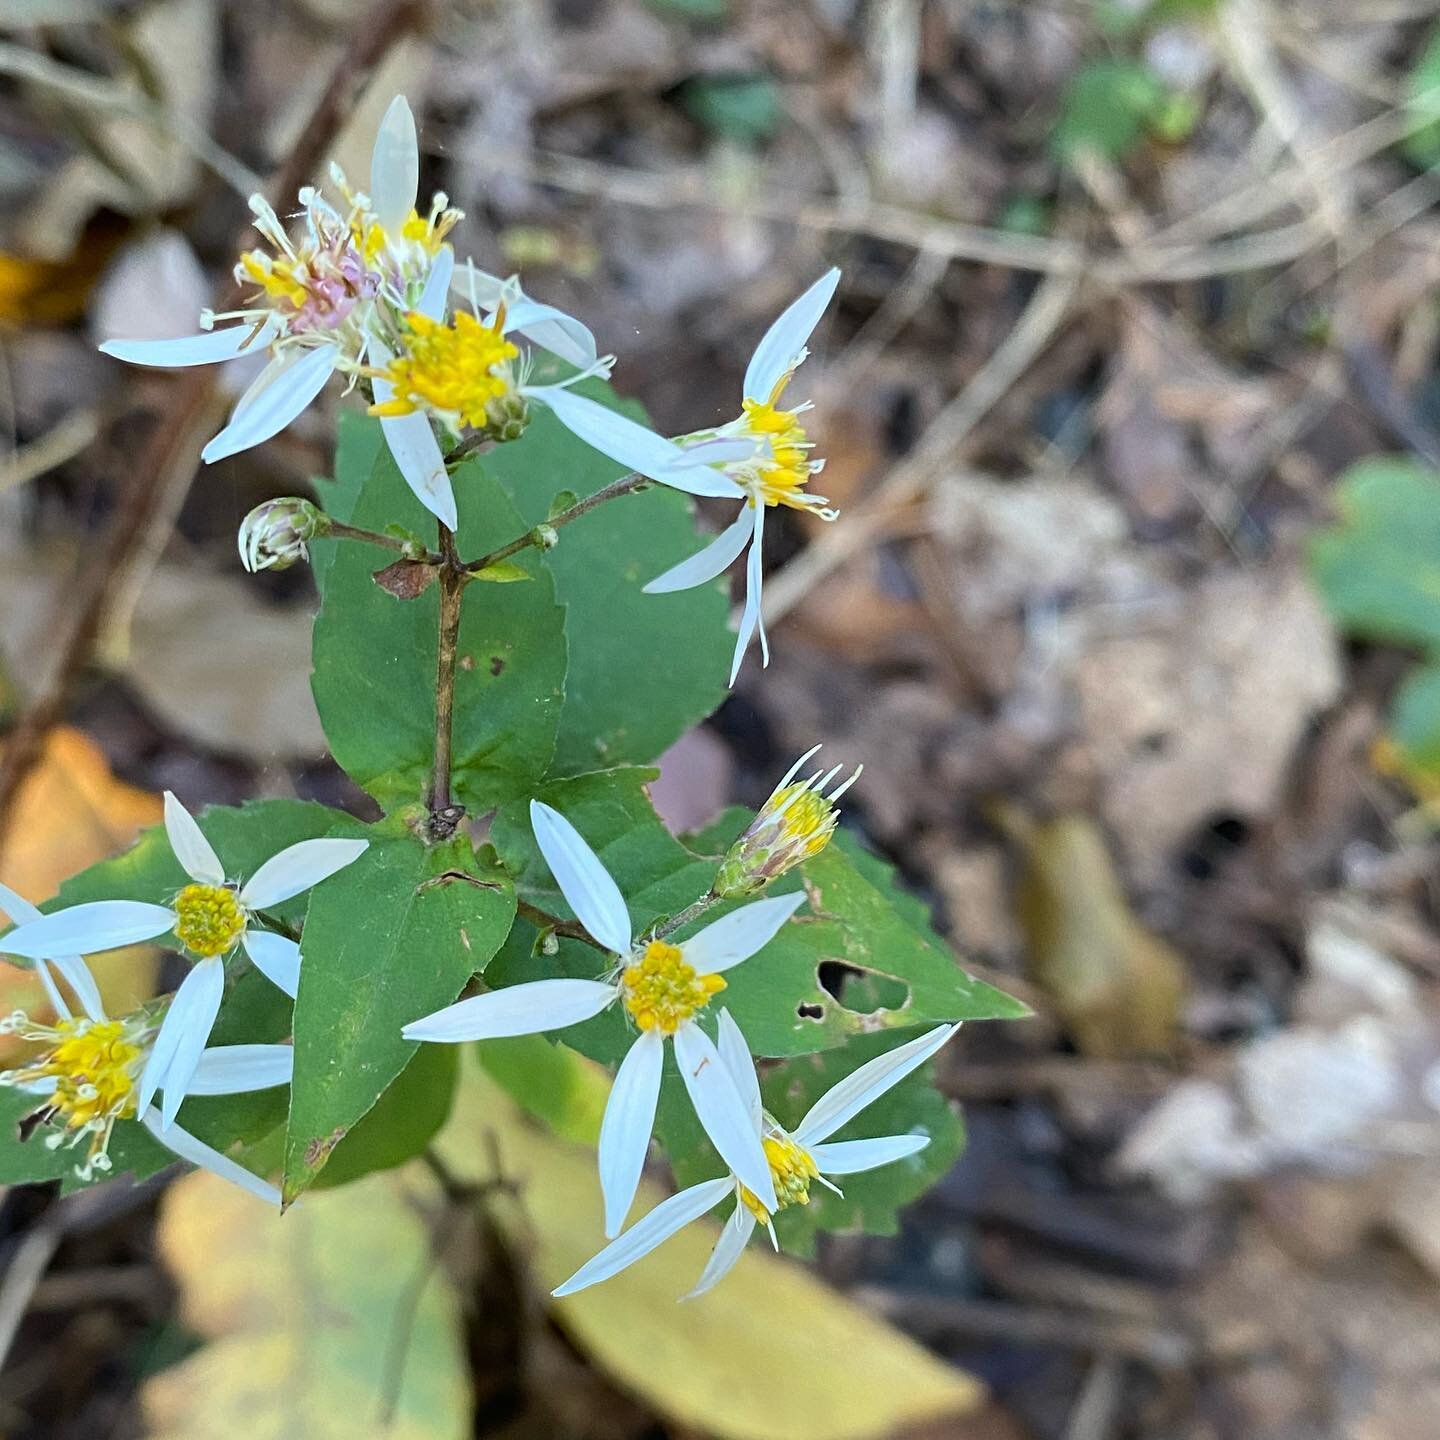 White wood Aster; pollinating and making beauty for our Earth.